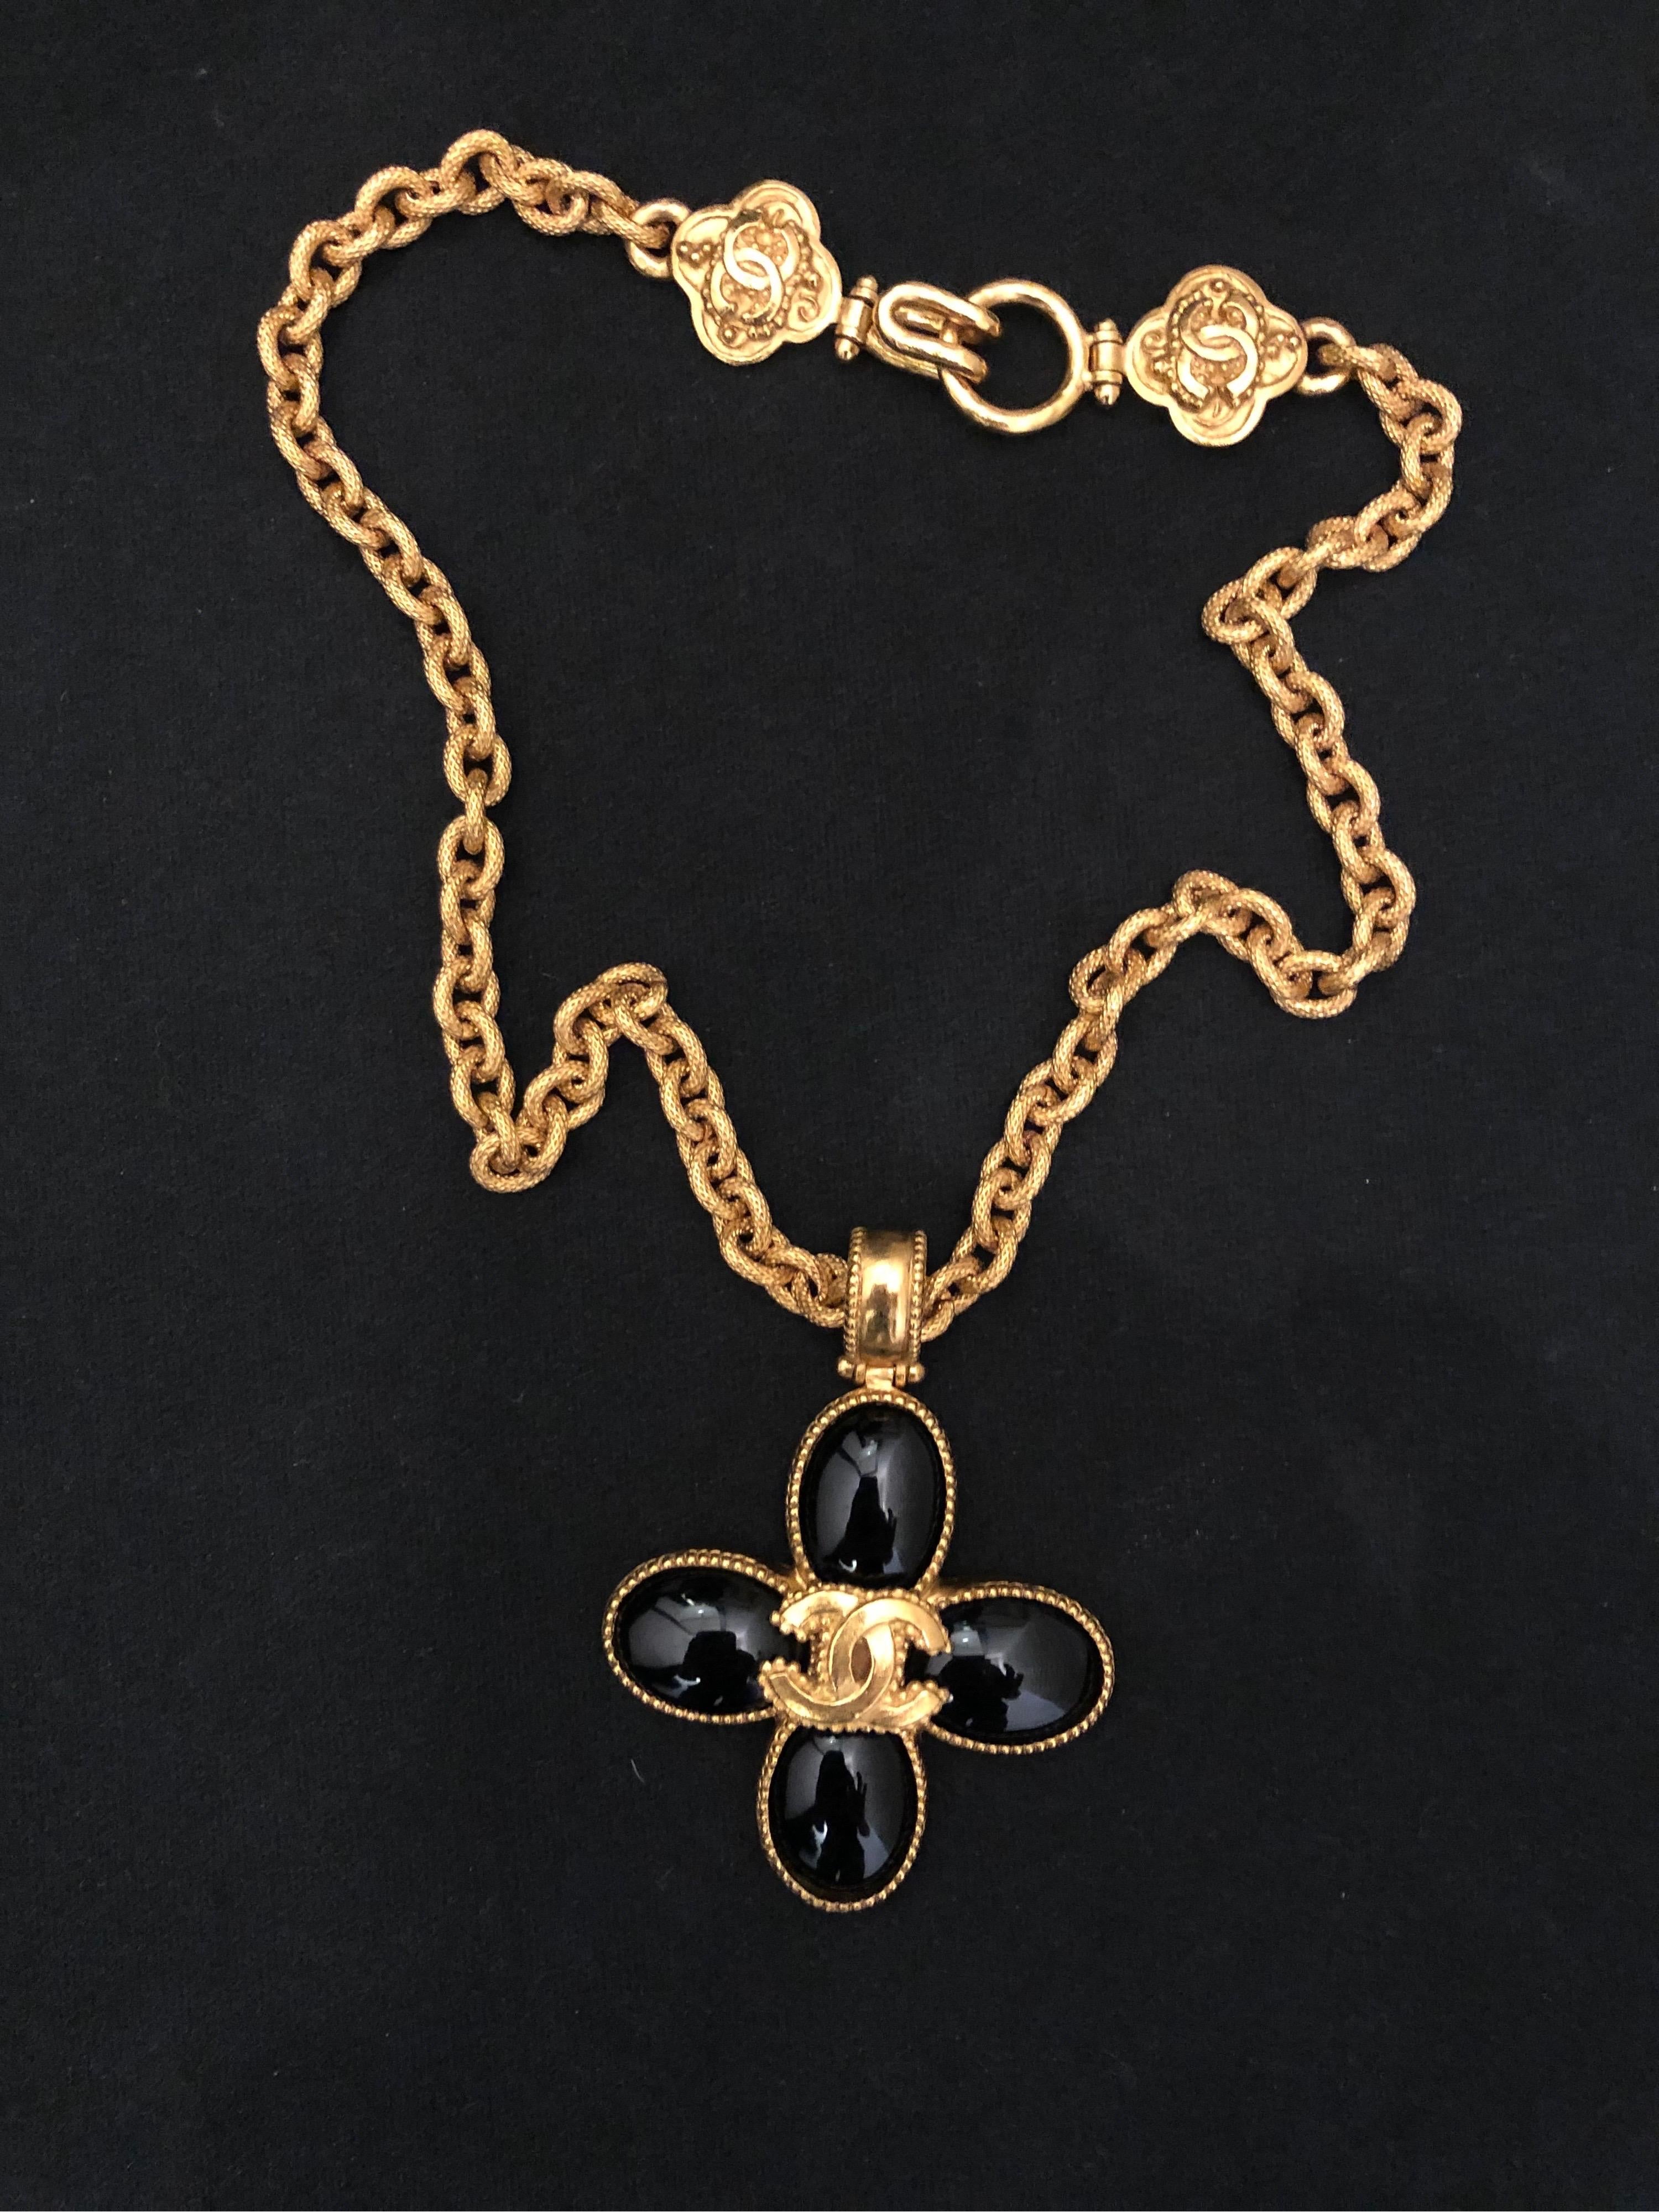 1990s Chanel gold toned textured chain necklace featuring a gold toned CC logo resting on an iconic Chanel clover charm in black onyx stones. Measures 48 cm in length Clover charm 7.1 x 5.3 cm. Hook fastening. Comes with box. 

Condition - Minor